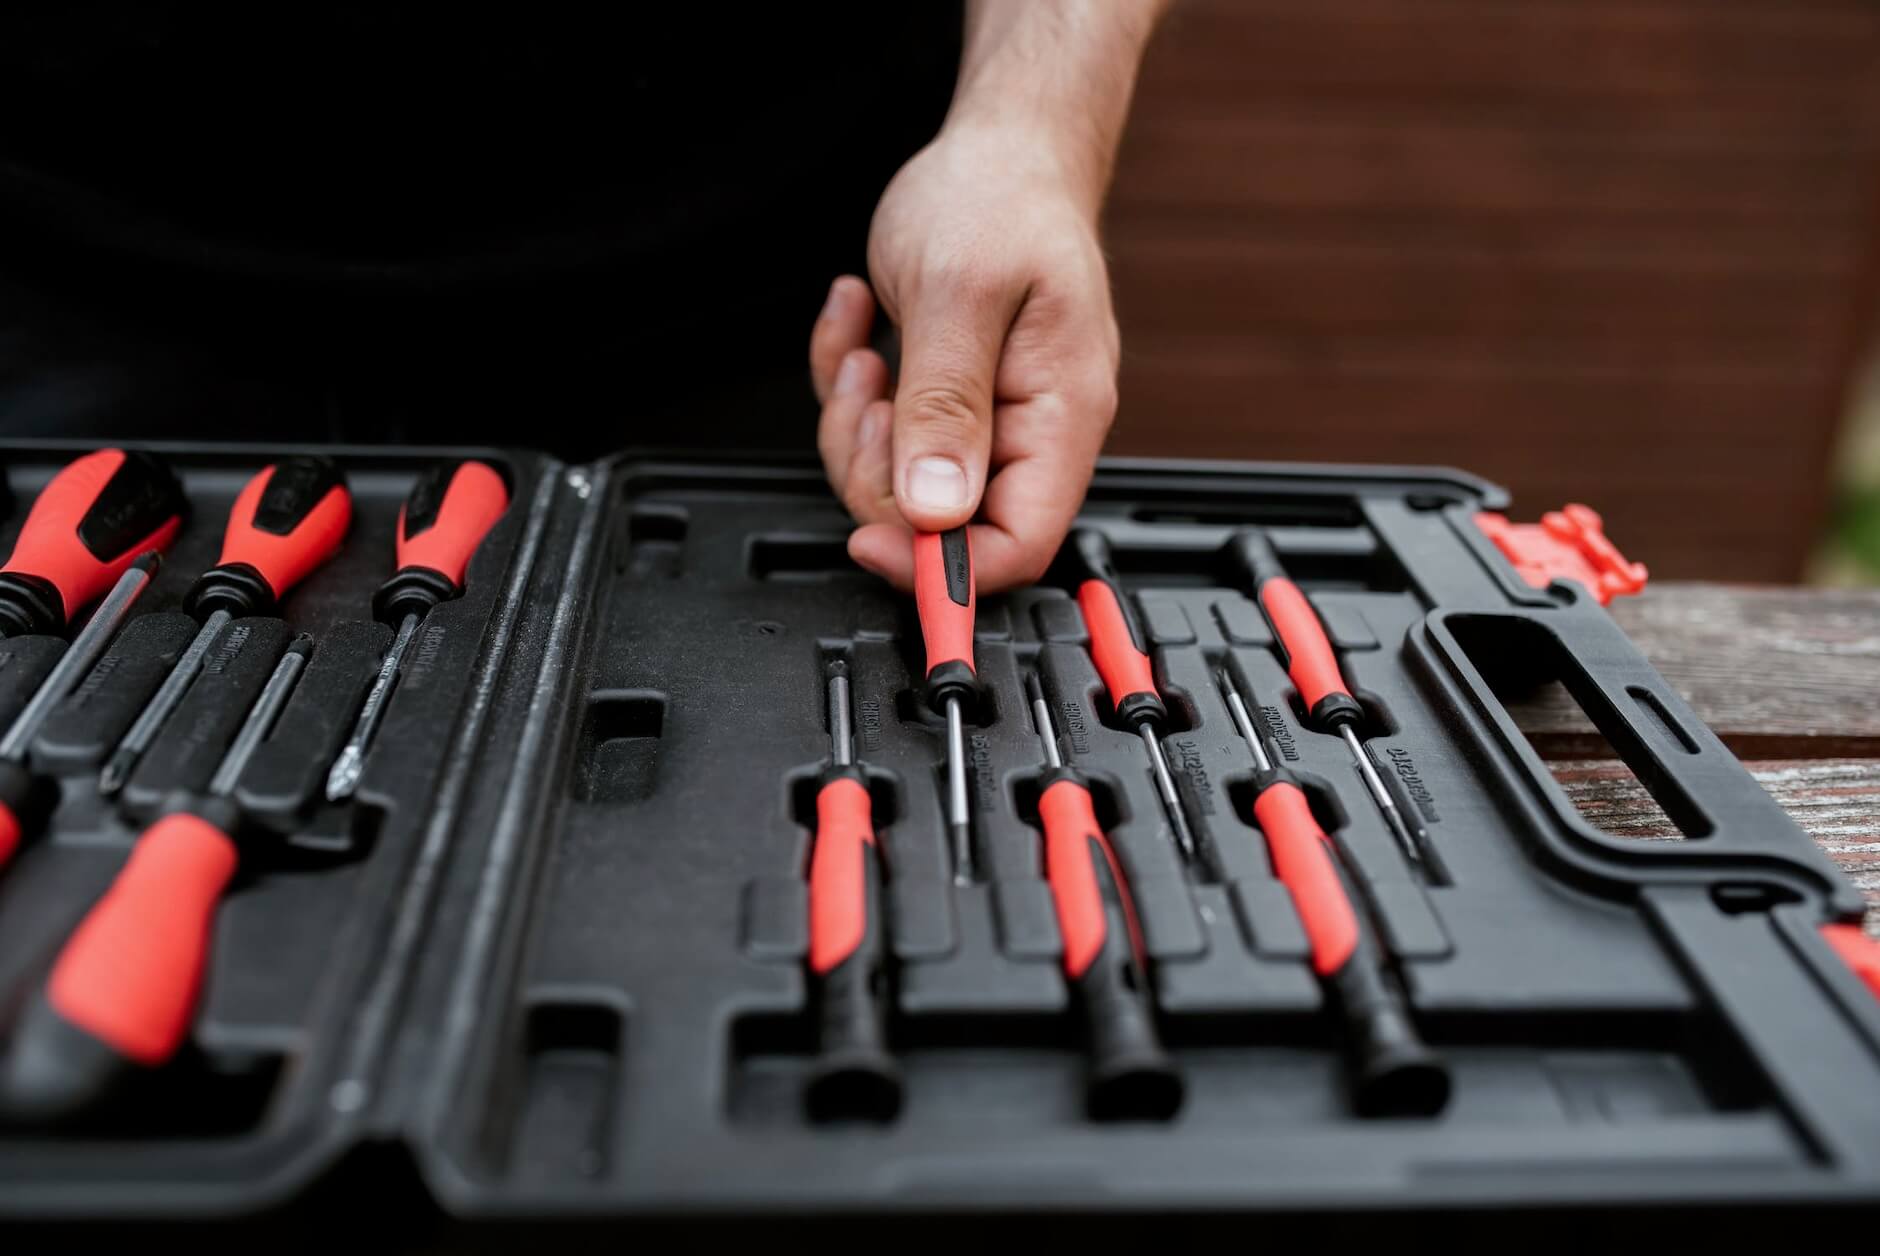 Tool kit with screwdrivers ready for long-distance moving